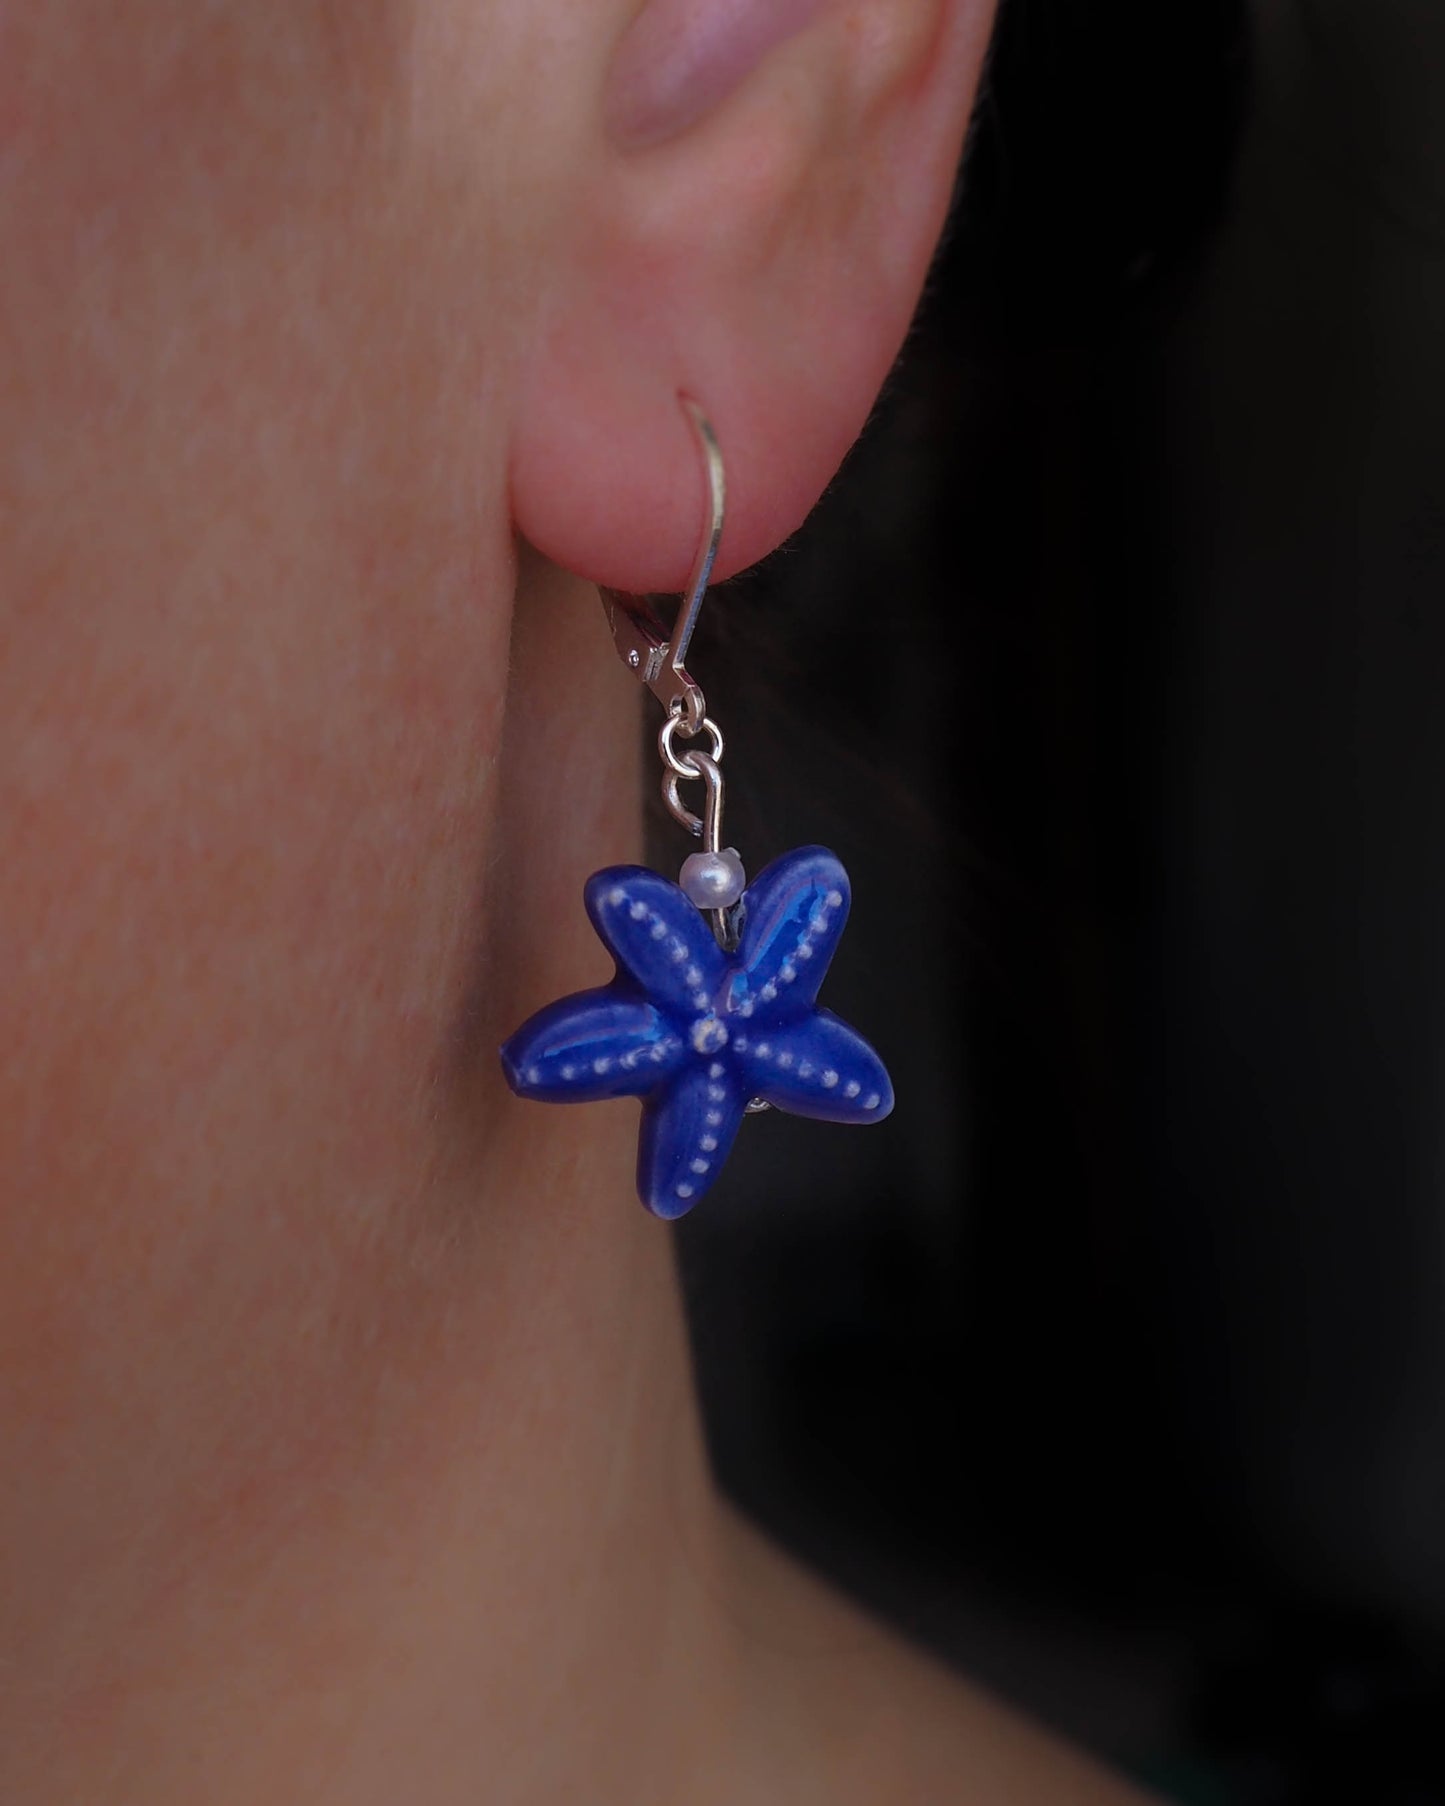 Handcrafted Silver Earrings with Blue Ceramic Sea Stars - Nautical Charm